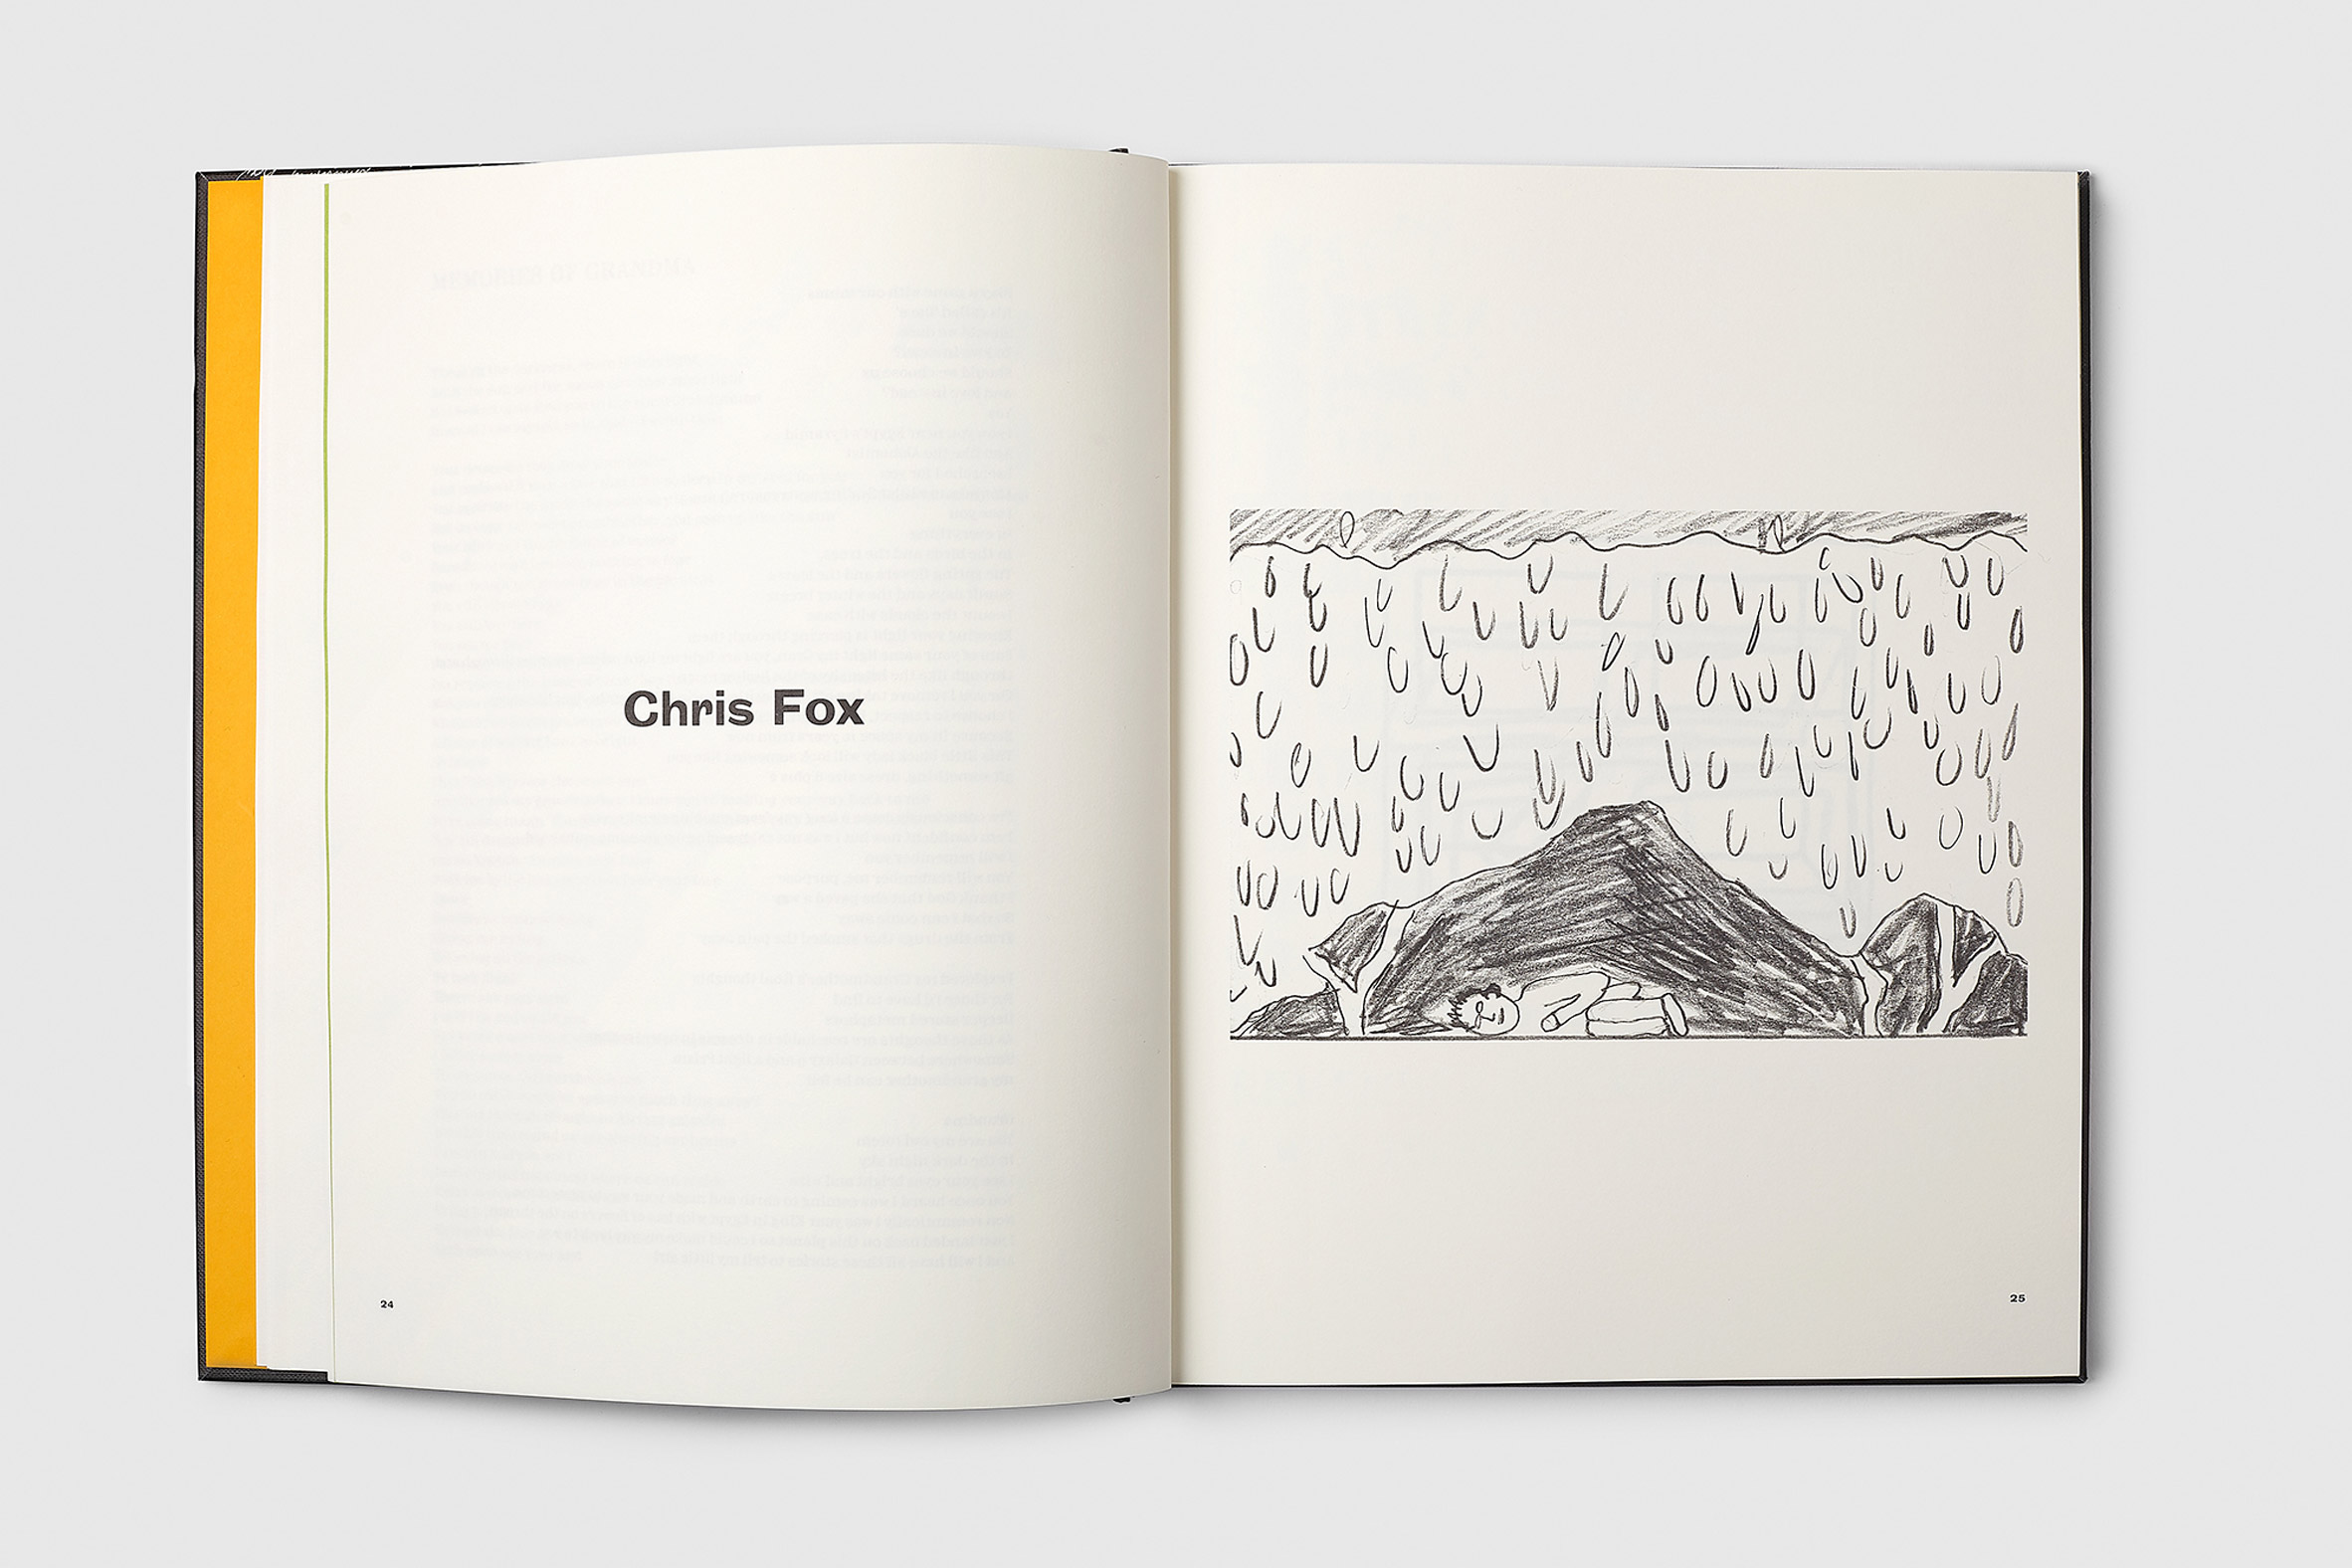 Chris Fox's comic strip for Accumulate London's The Book of Homelessness 